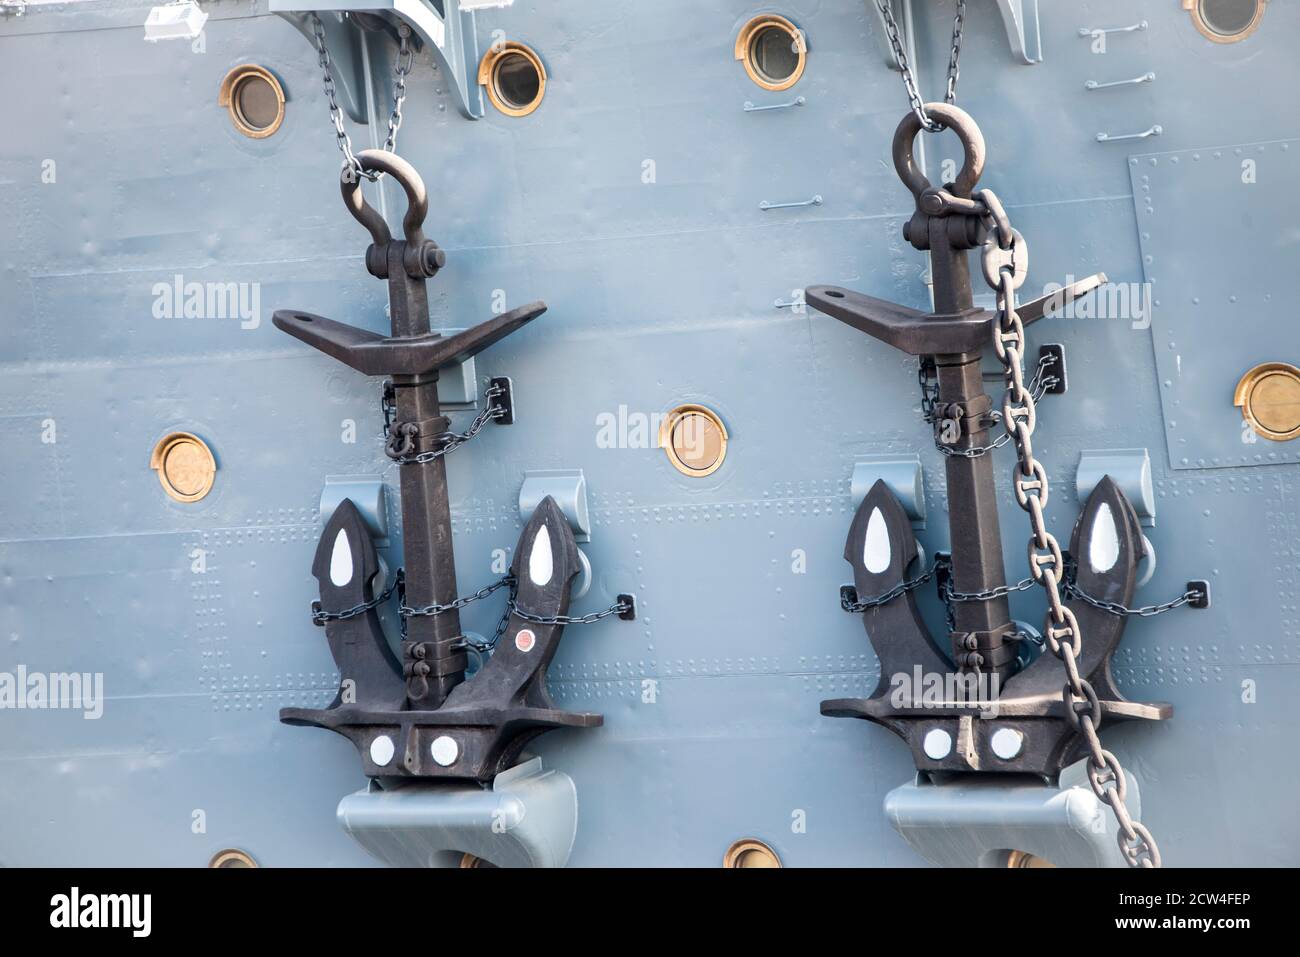 Ankors on the battle cruiser 'Aurora' built in the 19th century on the Neva river in St. Petersburg Stock Photo